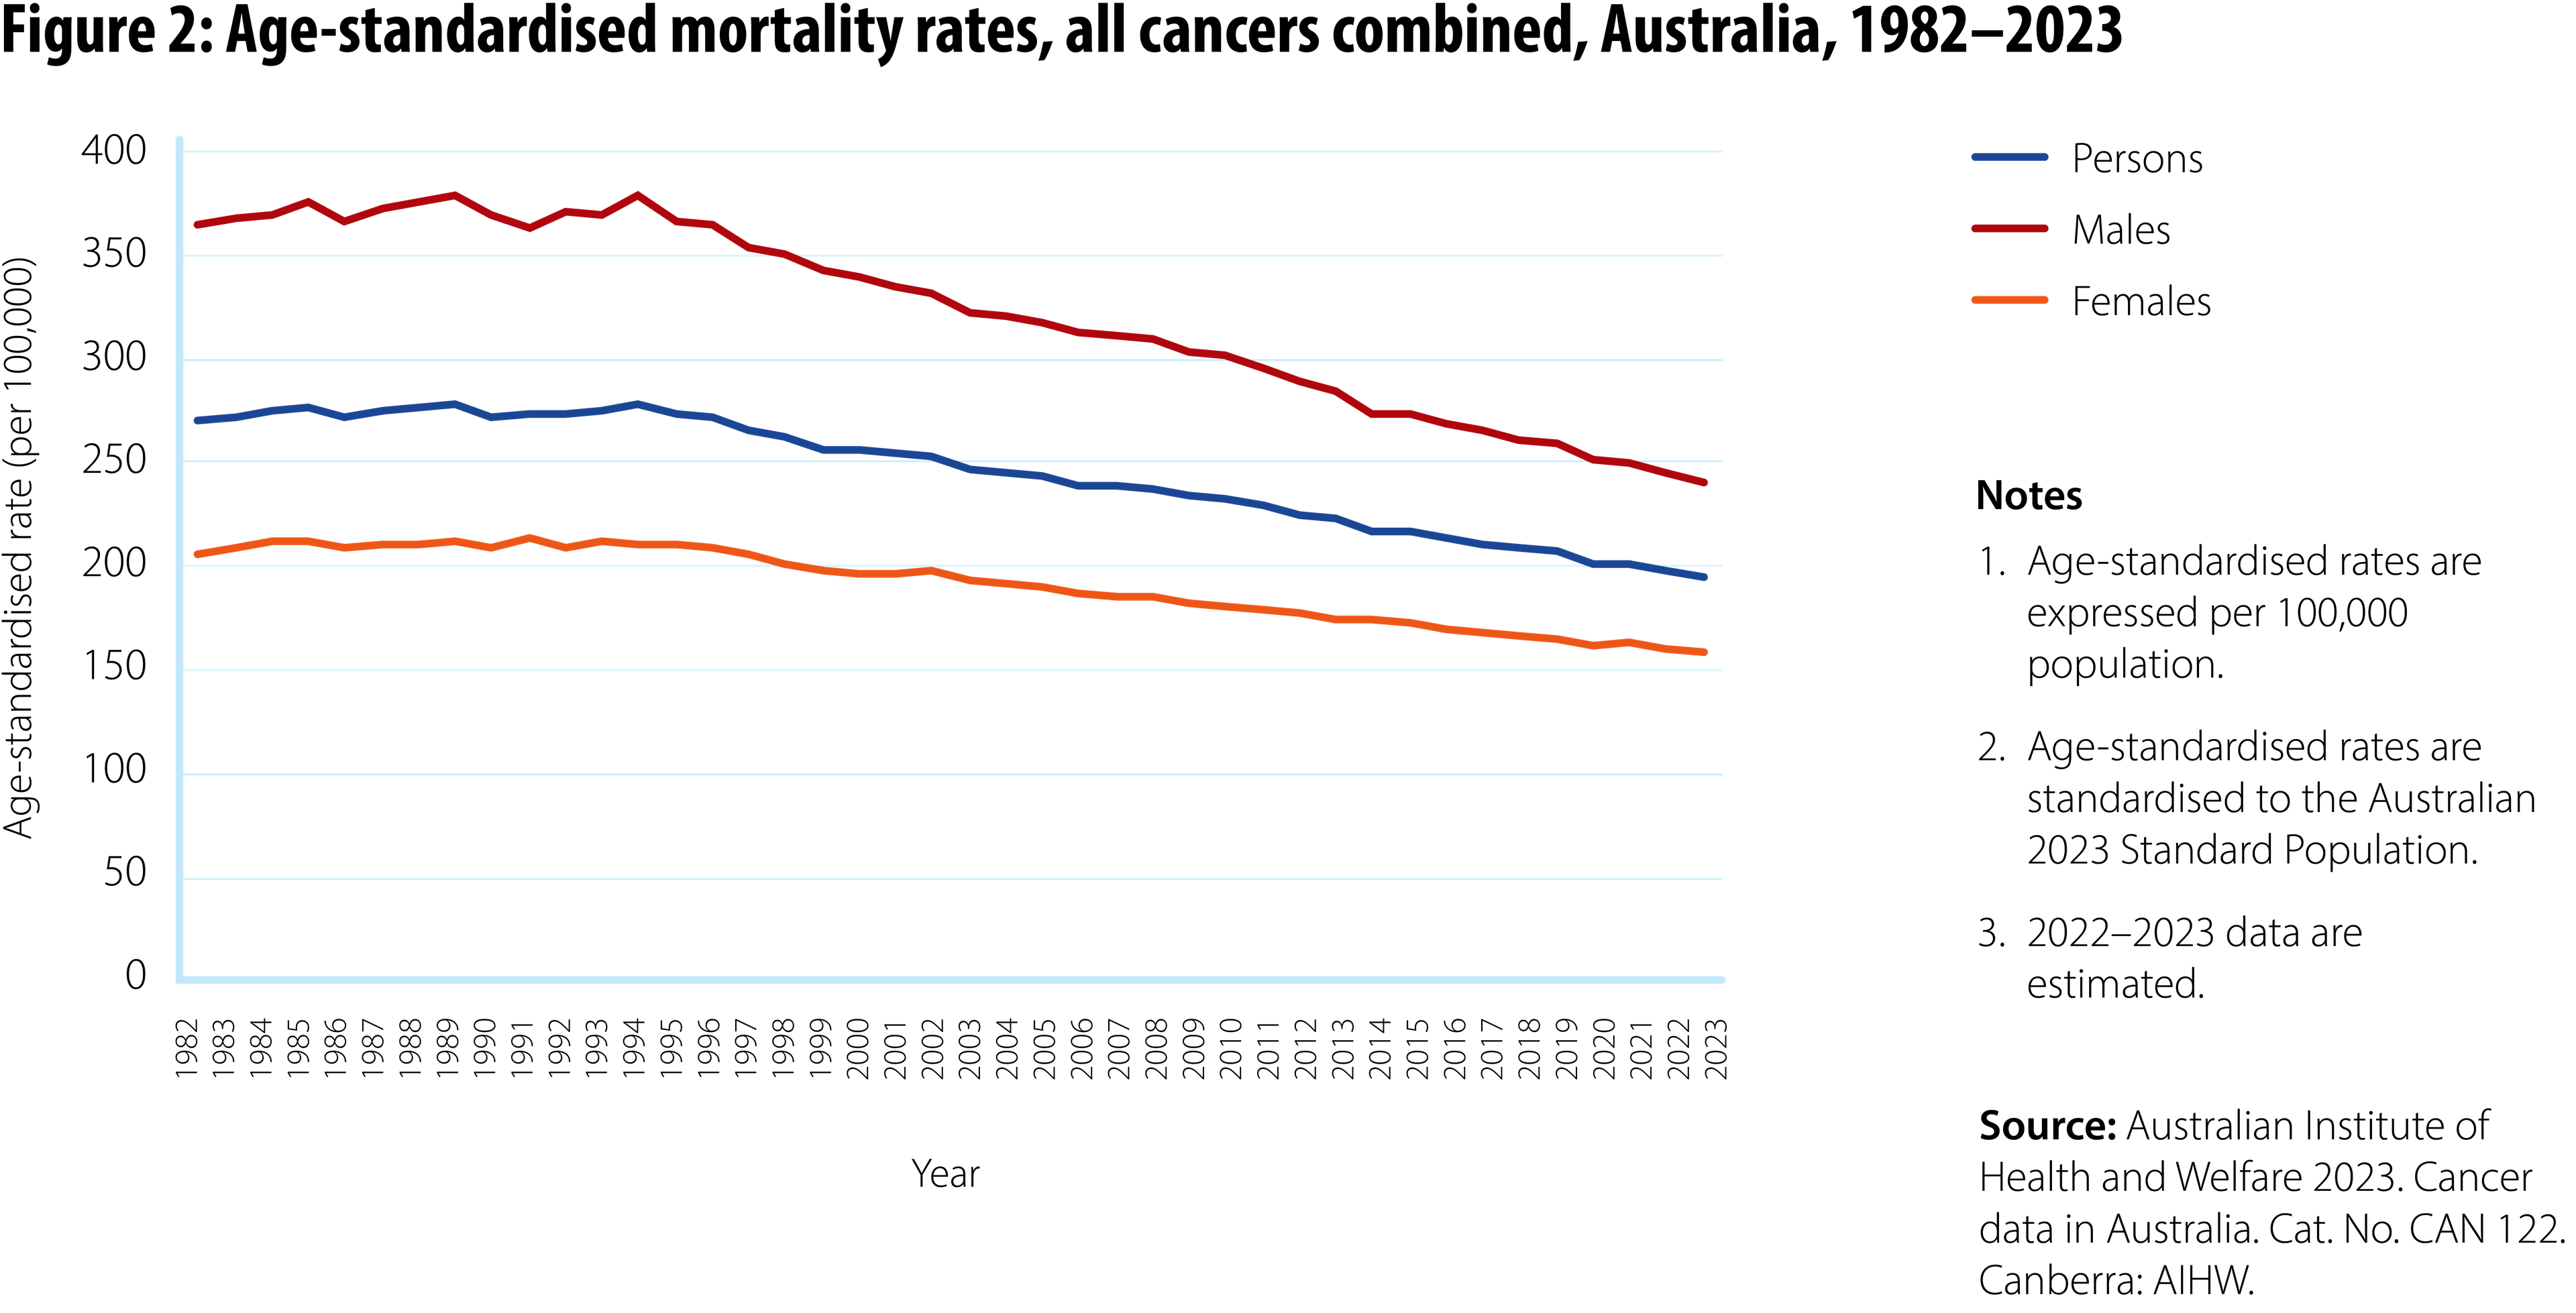 Figure 2: Line graph showing age-standardised mortality rates due to cancer for all cancers combined in Australia between 1982 and 2022. Mortality rates are shown on three separate lines – one for males, one for females, and one for all persons combined. This graph shows that mortality rates over this period have decreased. Mortality rates are consistently higher for males than those for females.